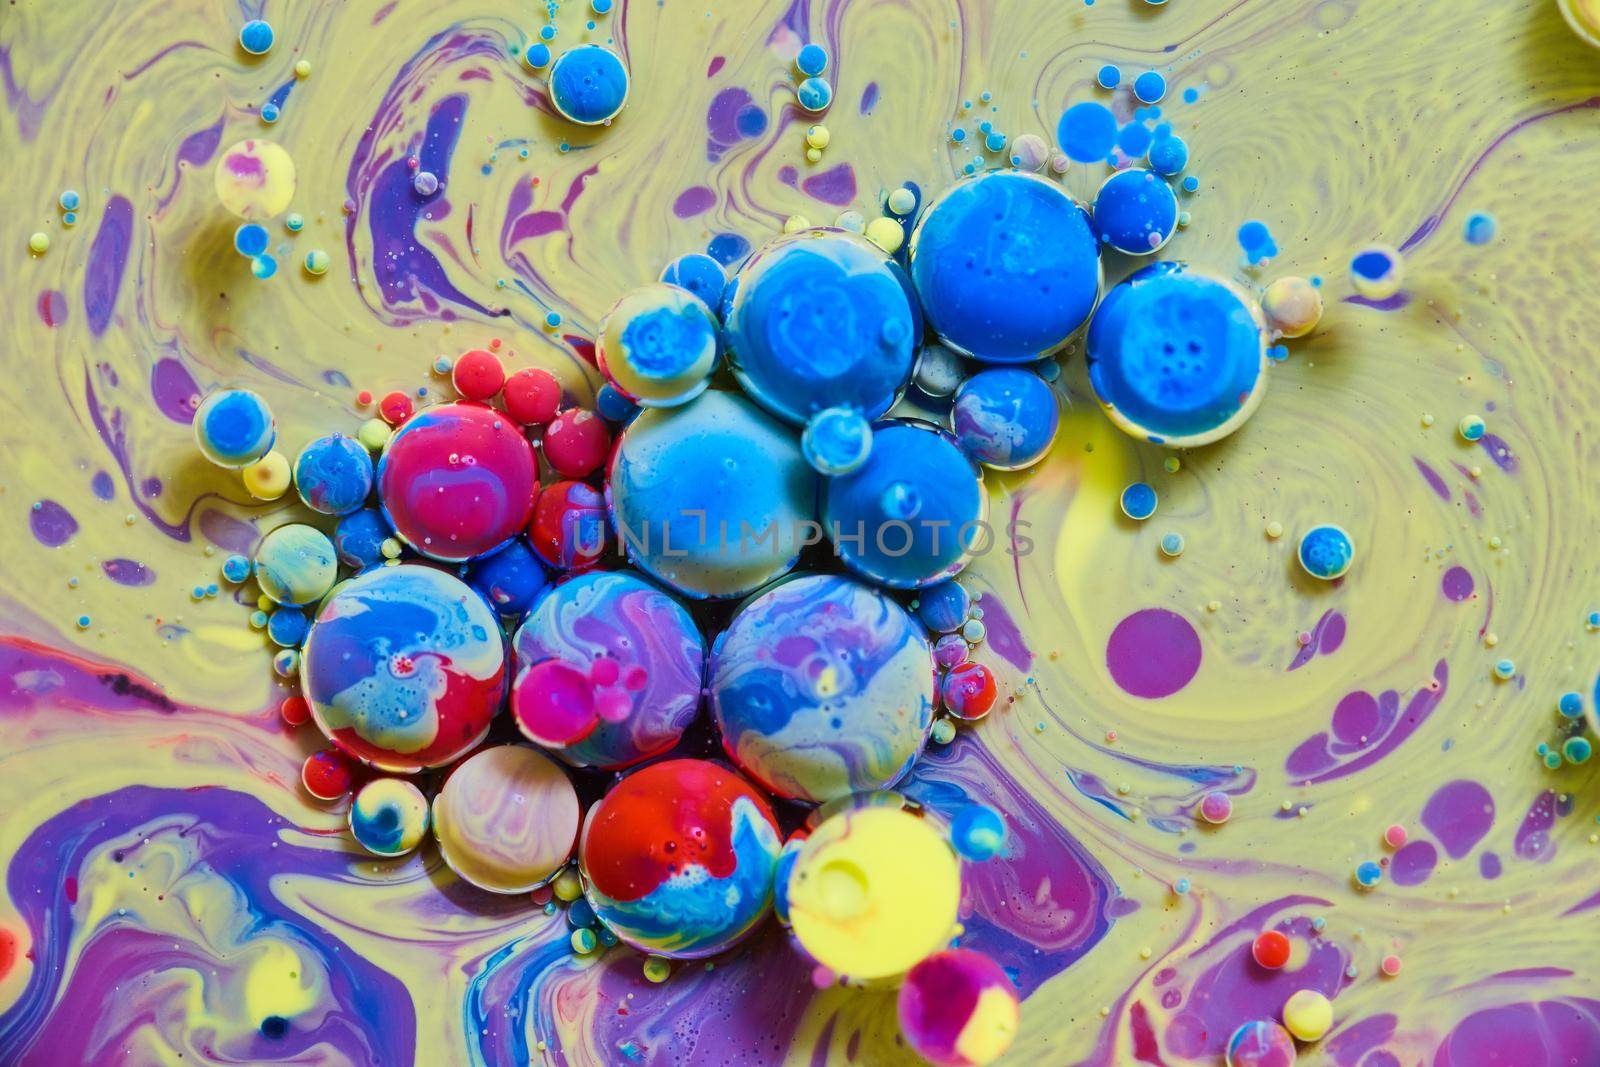 Image of Rainbow spheres on yellow and purple silky surface